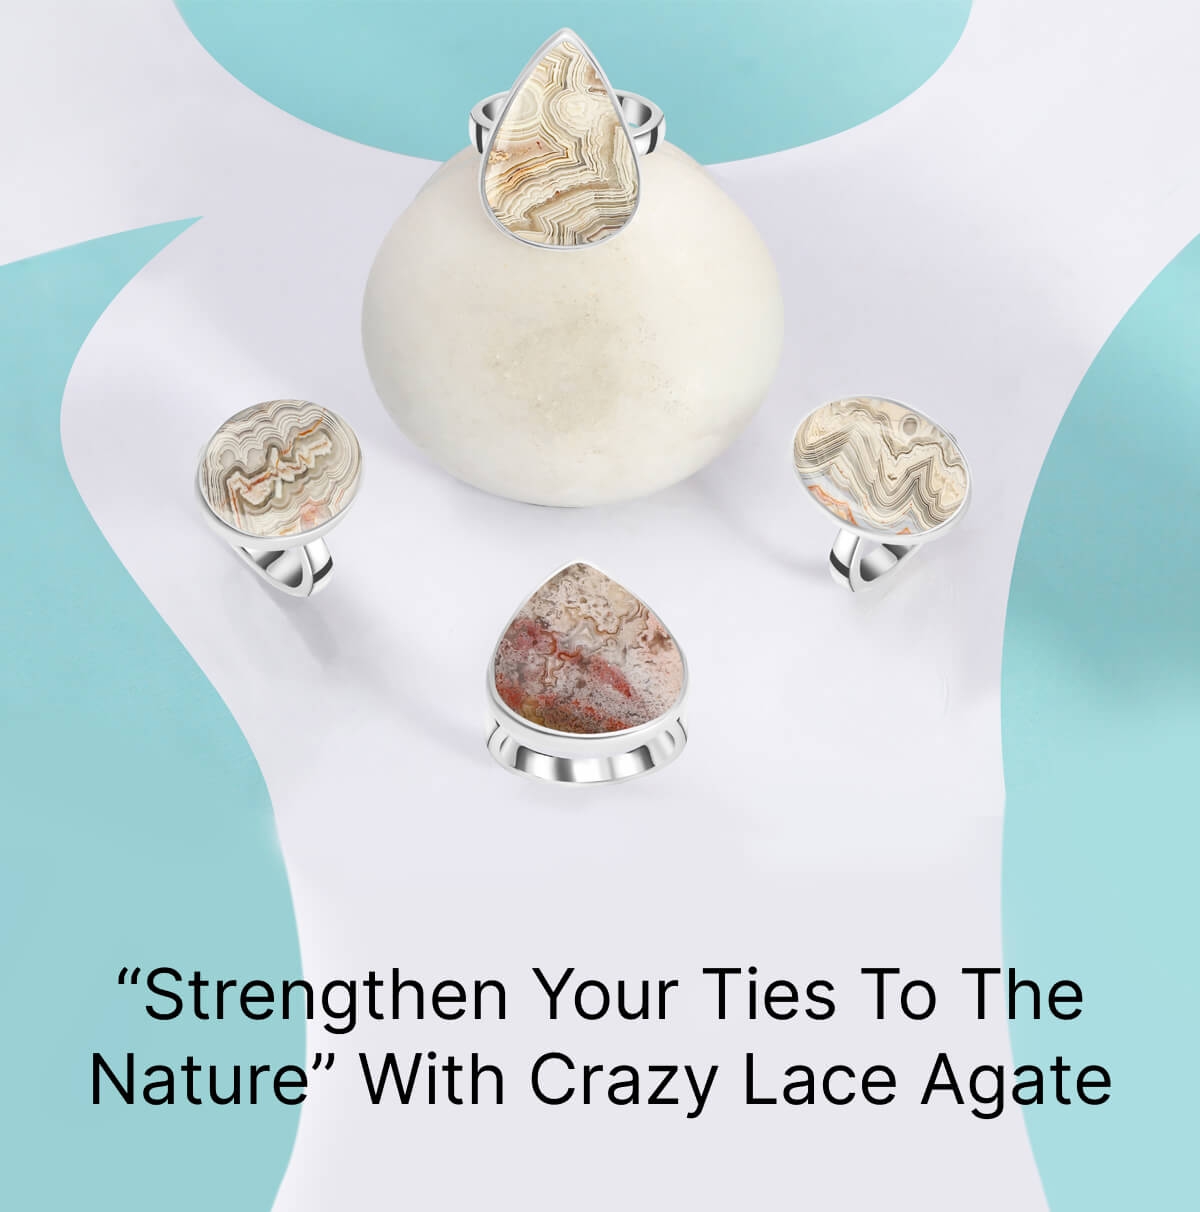 Crazy Lace Agate: Physical health benefits